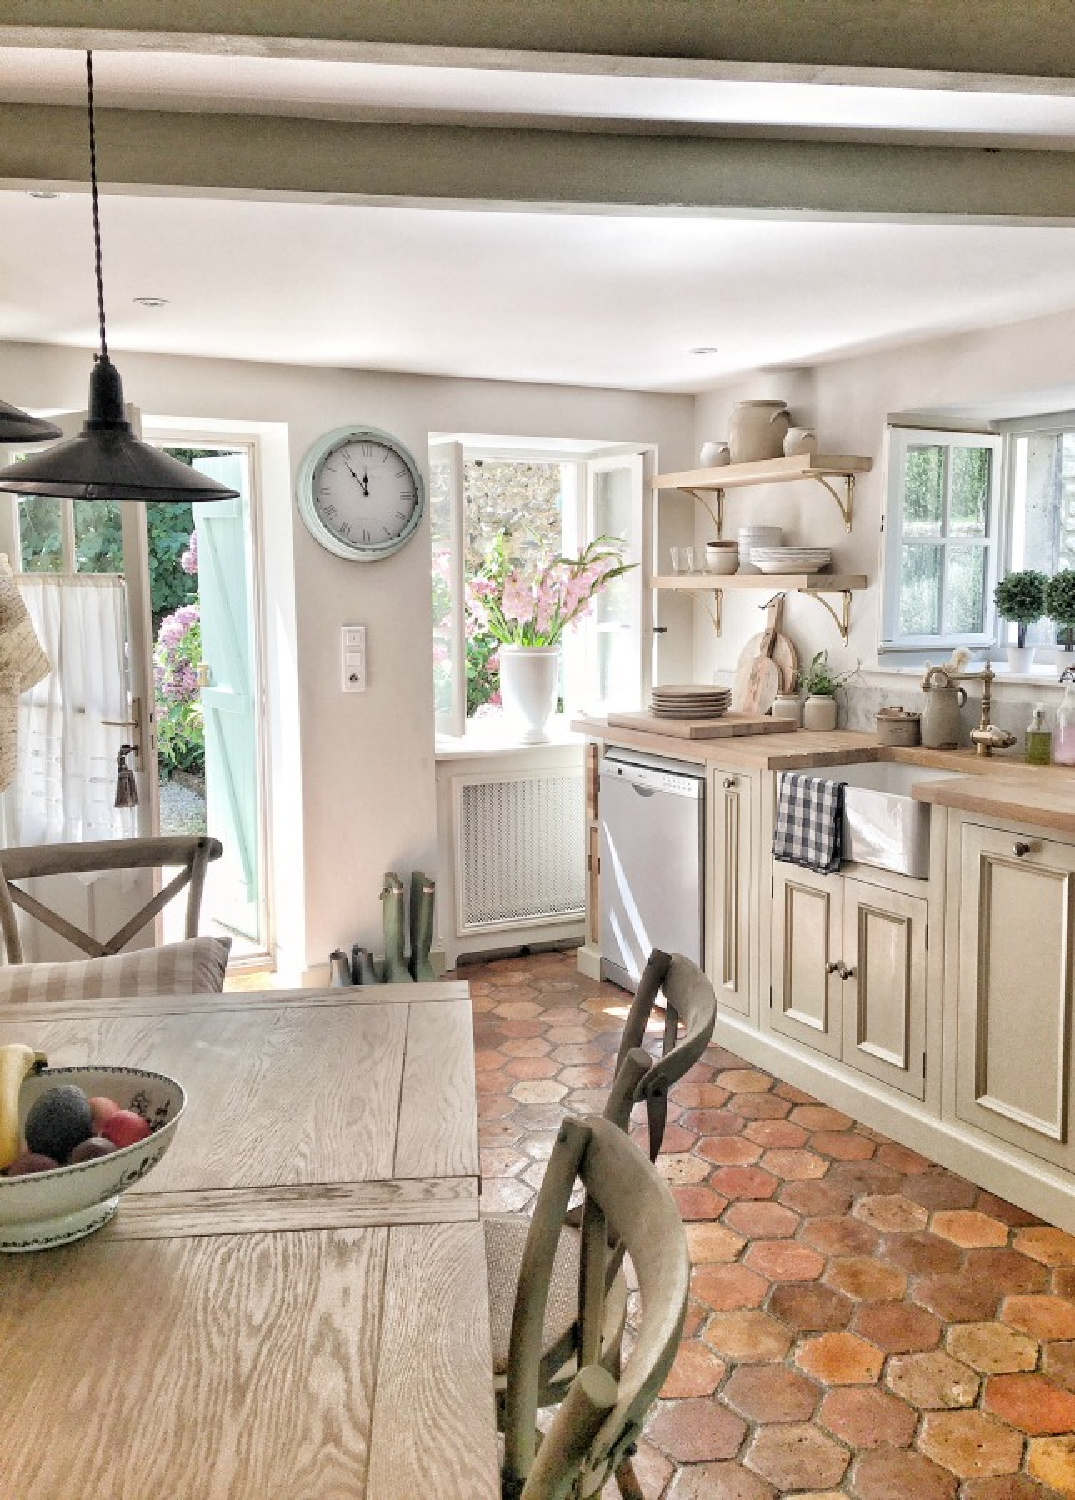 French farmhouse kitchen with putty colored cabinets, butcher block, farm sink, terracotta hex tile, and open shelving - Vivi et Margot.